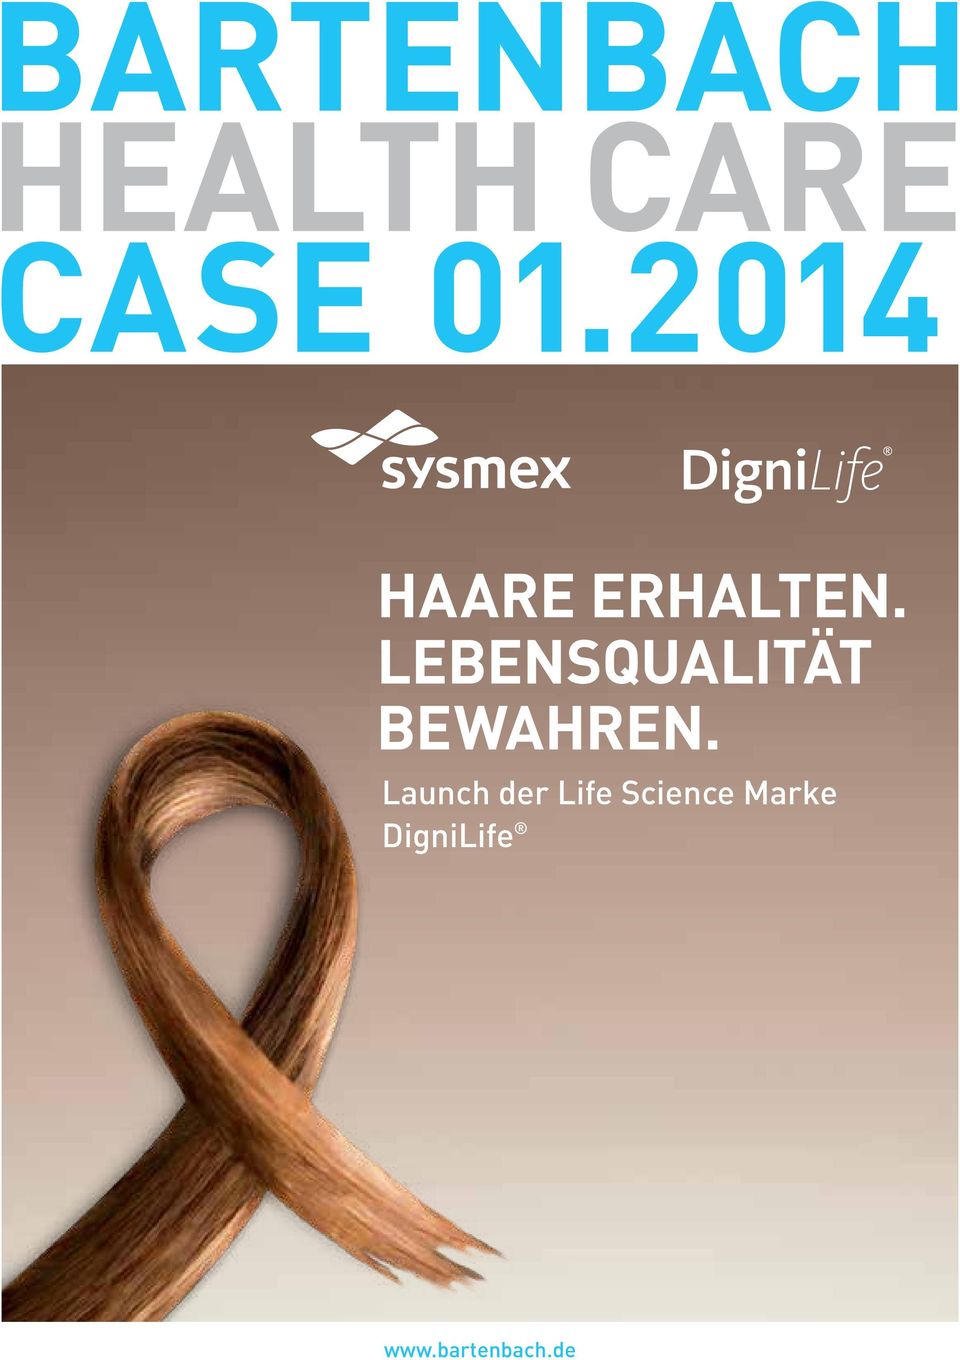 Launch der Life Science